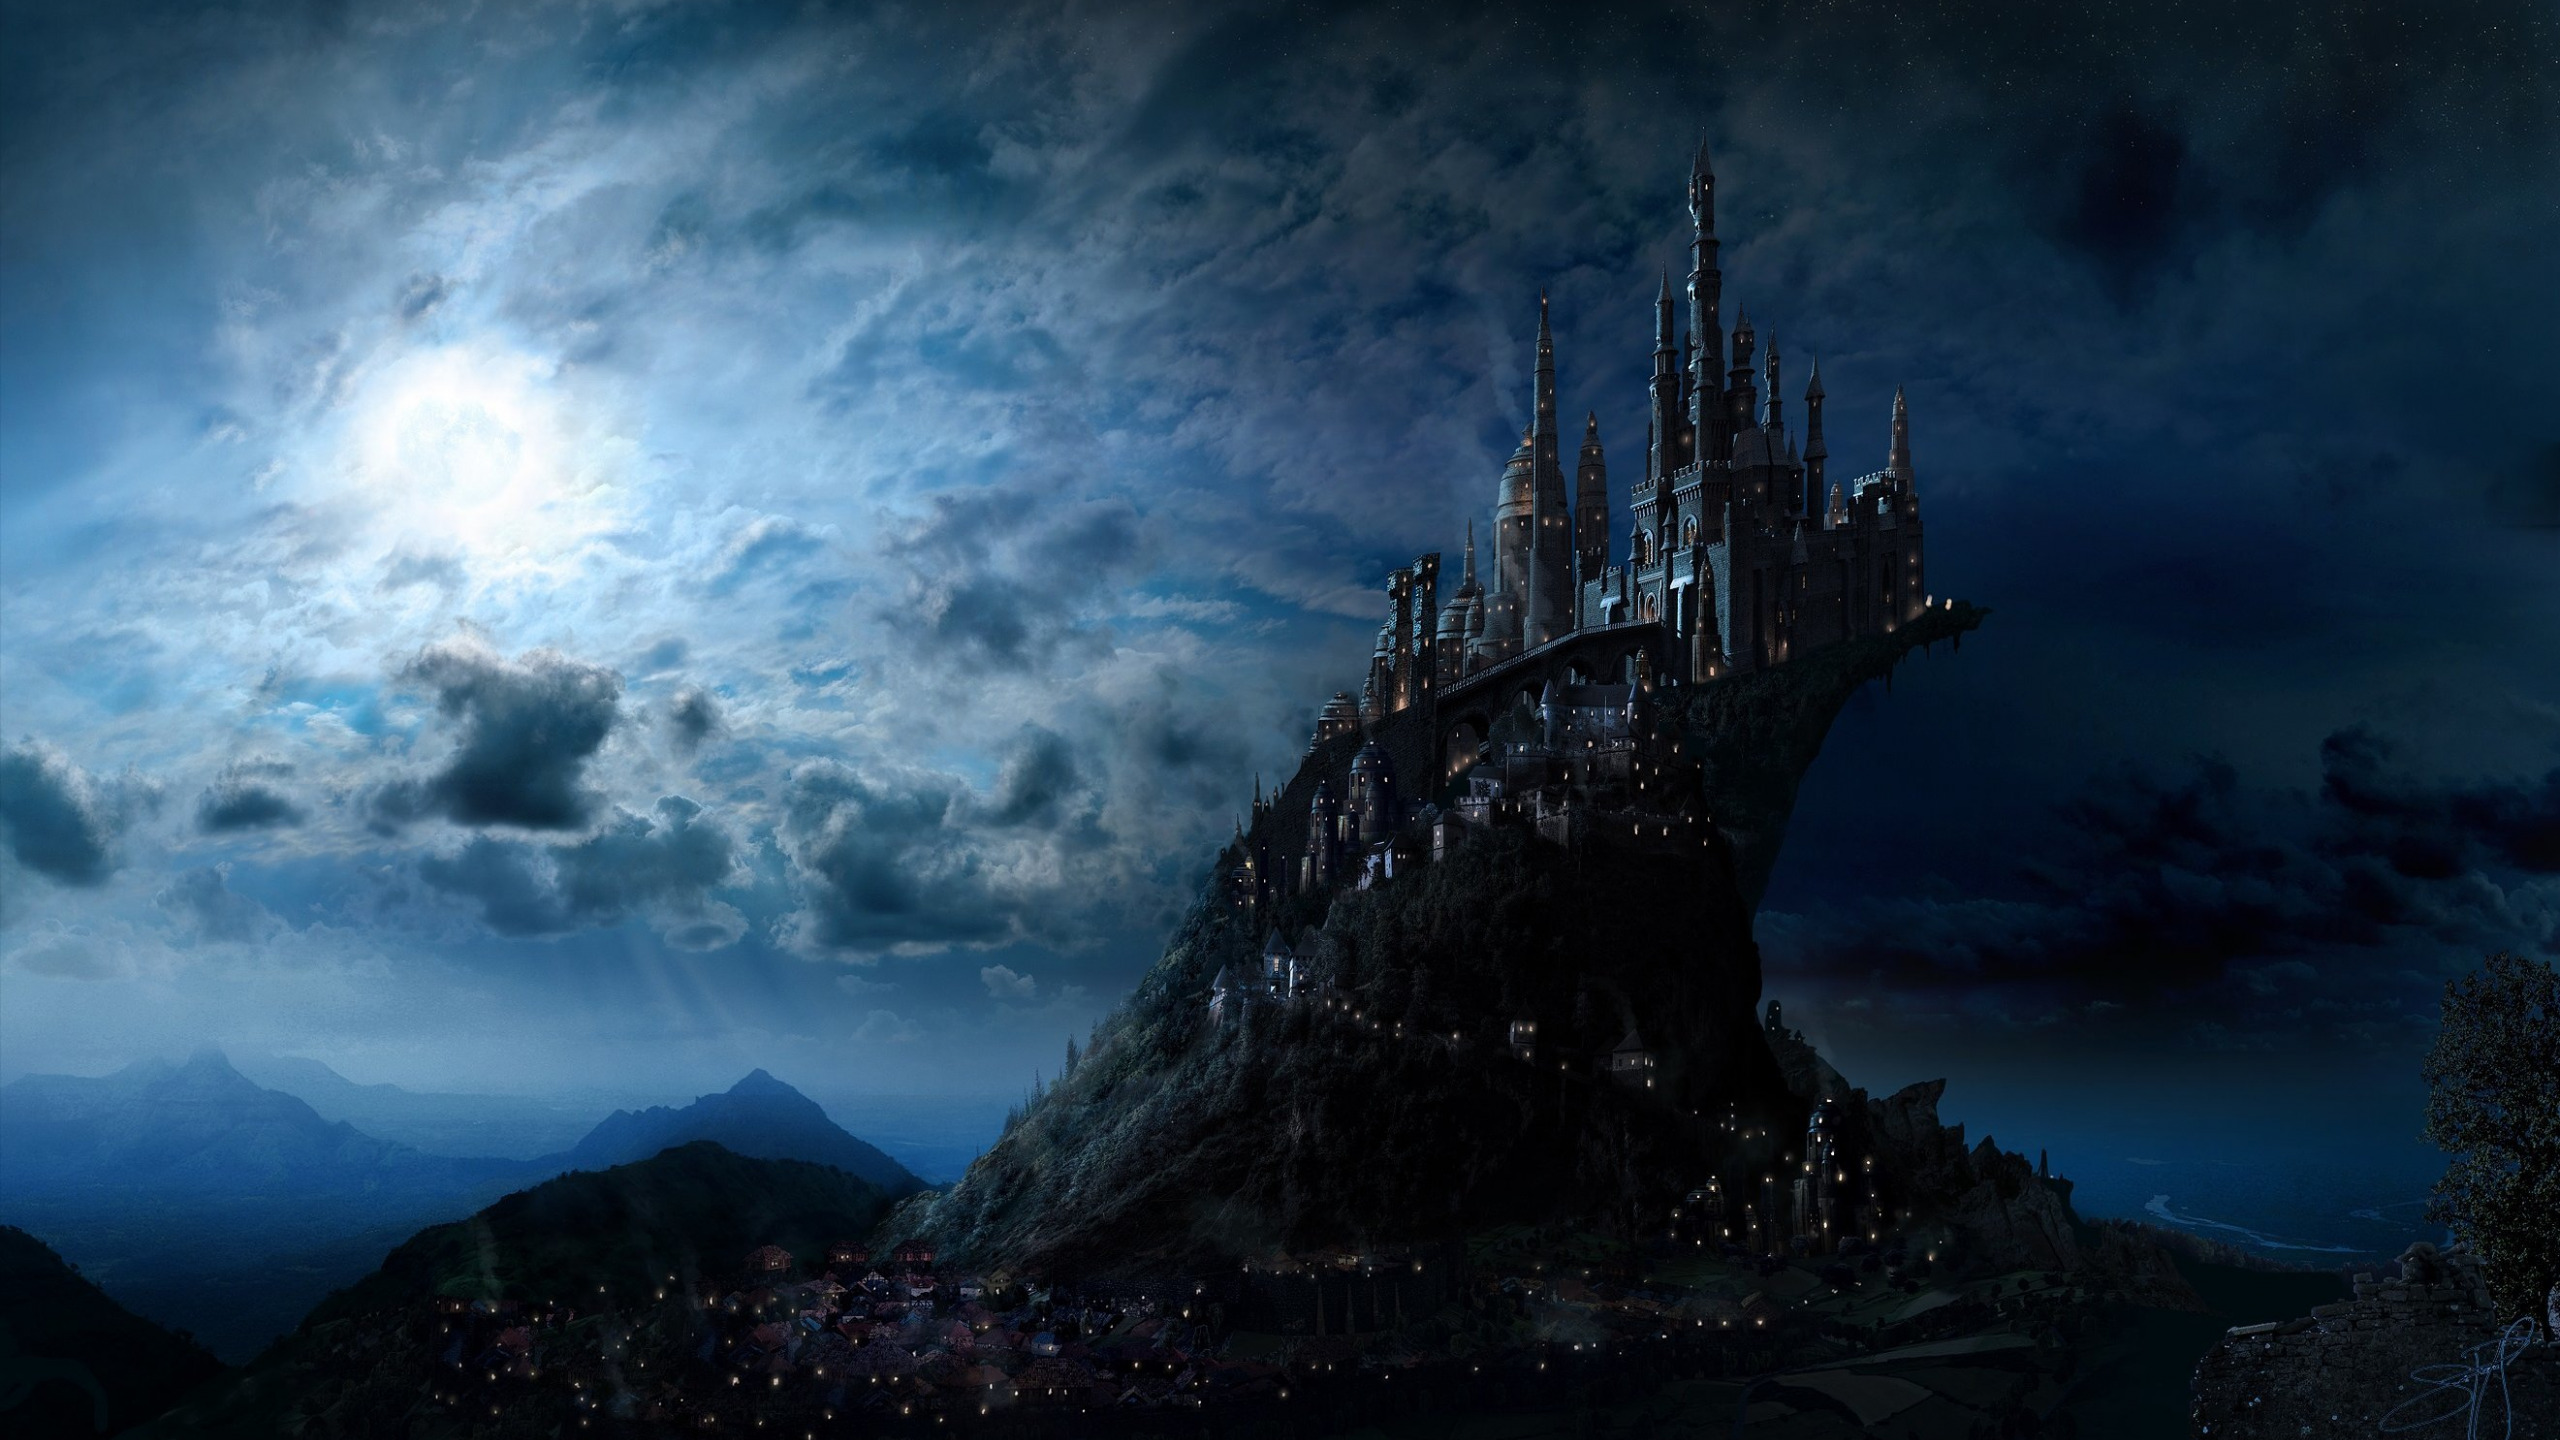 Download wallpaper the sky light night the city castle fiction the moon art fantasy section fantasy in resolution x